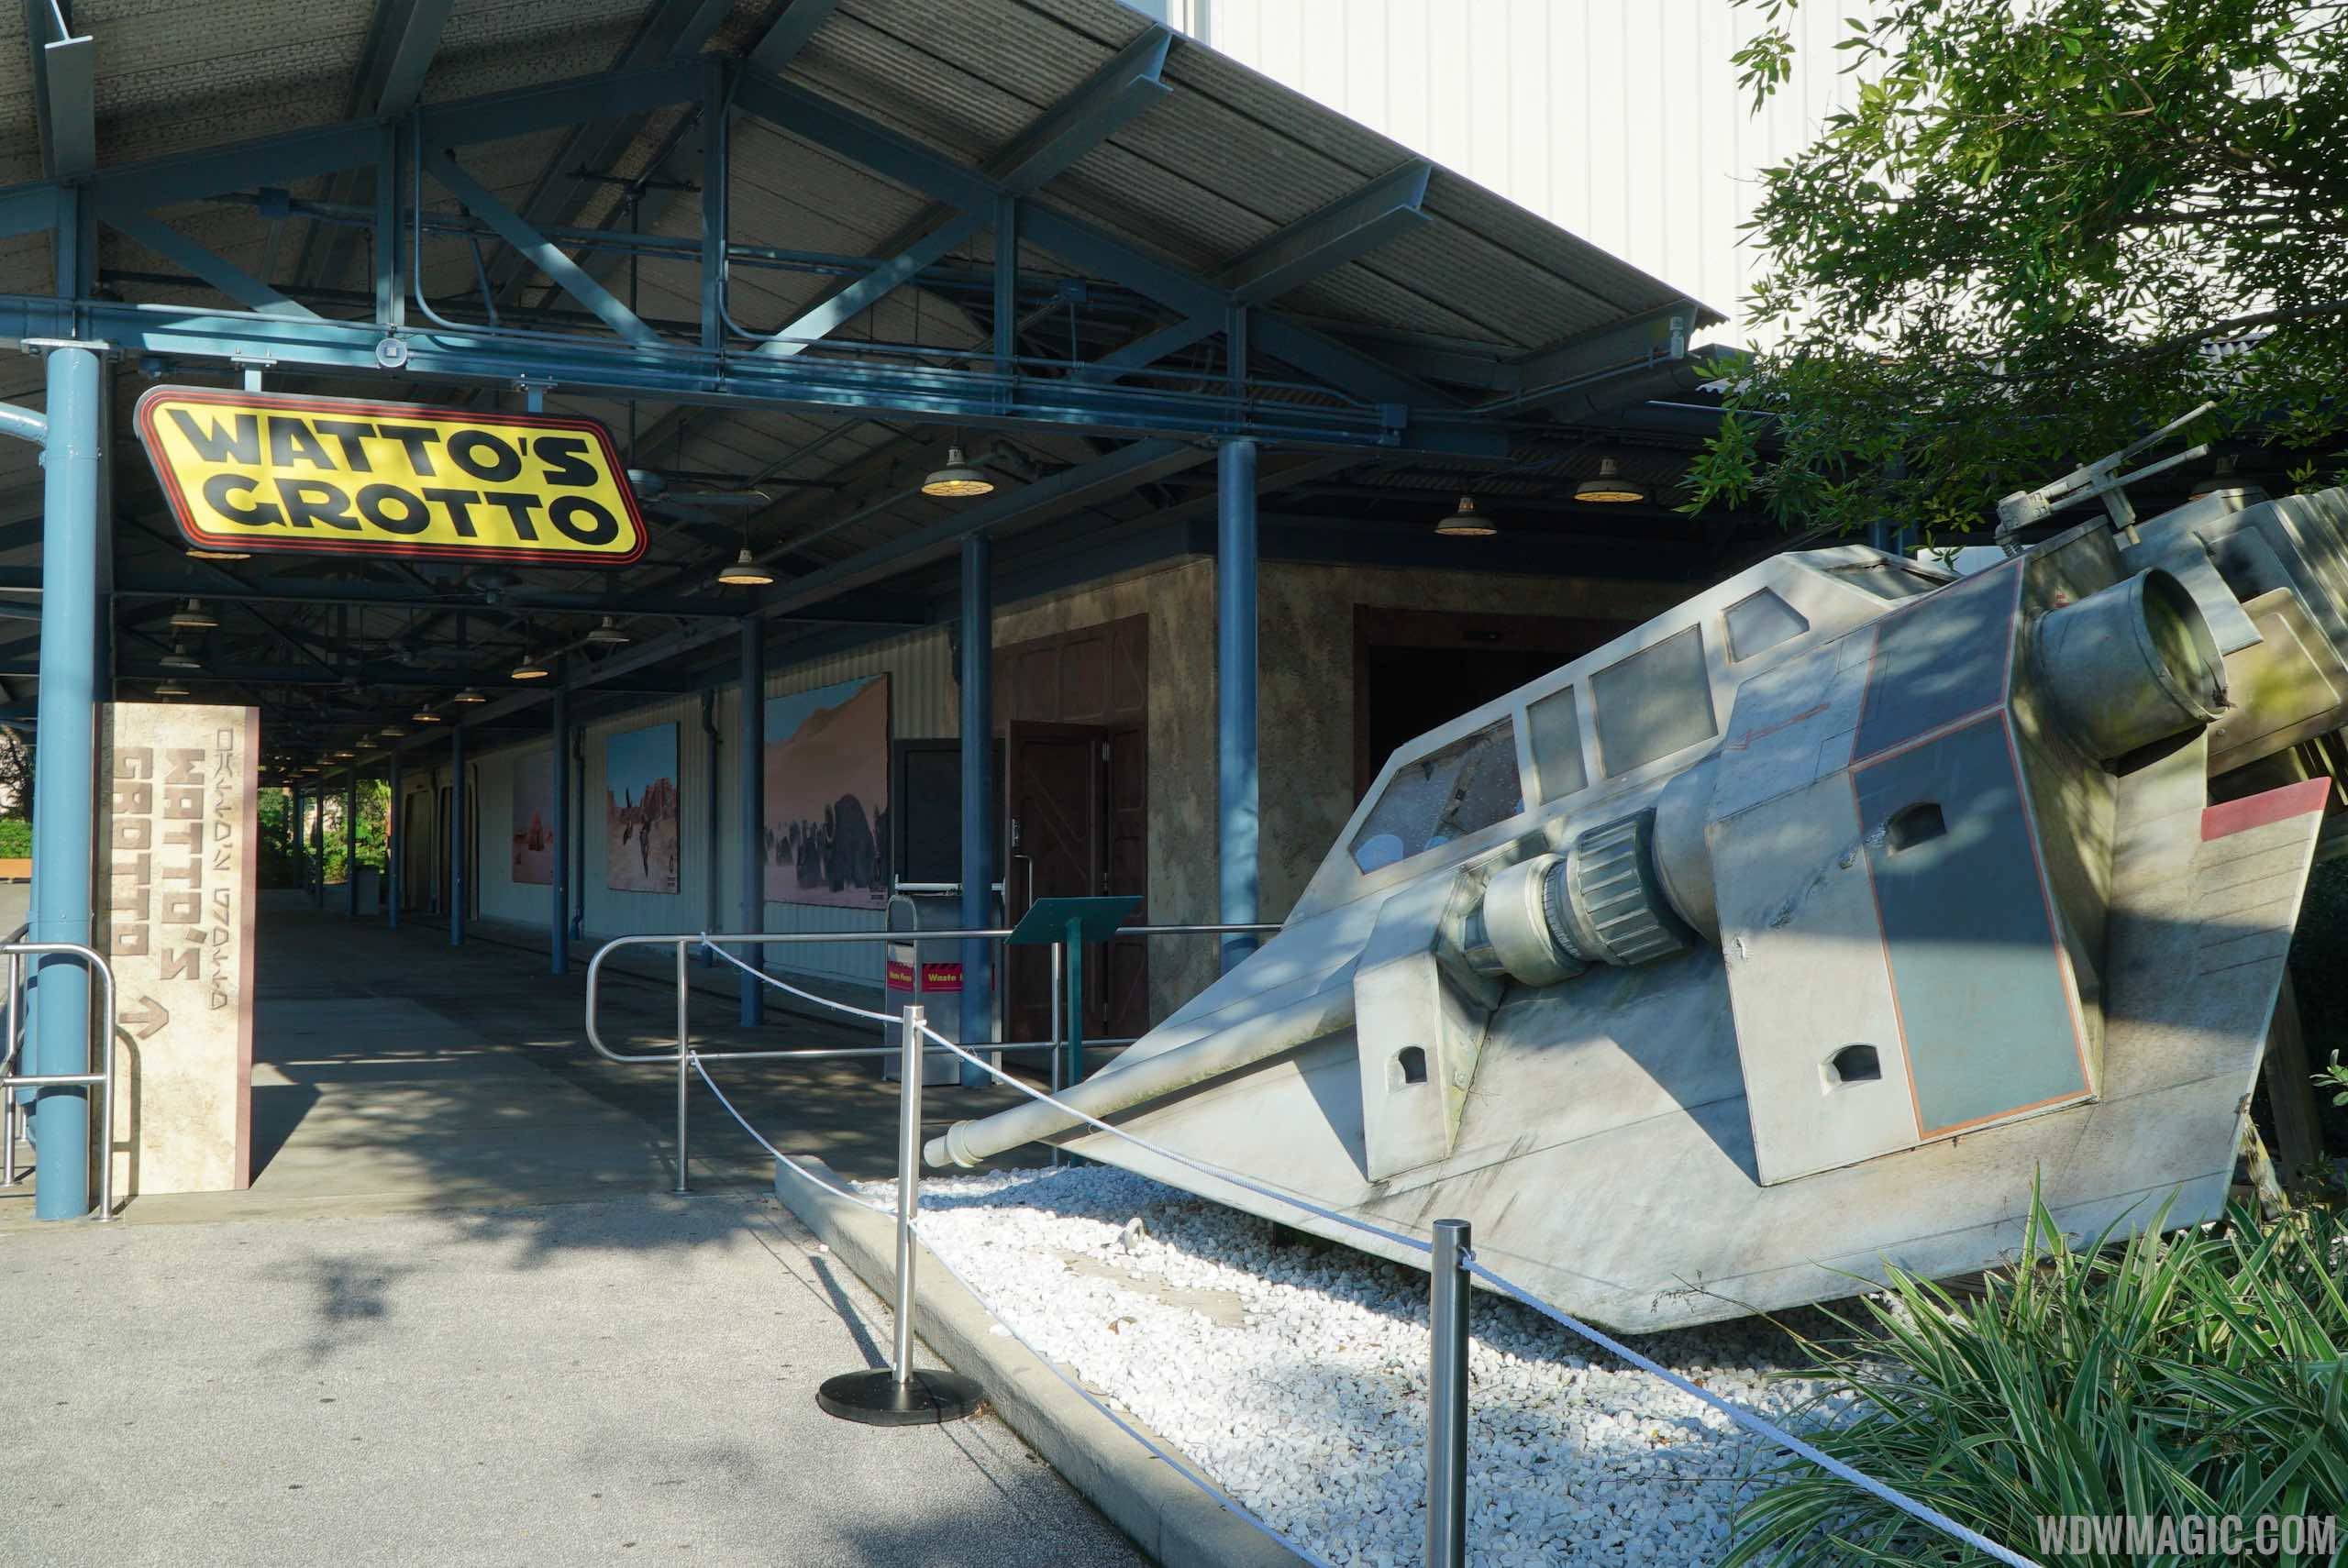 PHOTOS - Inside the new Watto's Grotto Star Wars store at Disney's Hollywood Studios